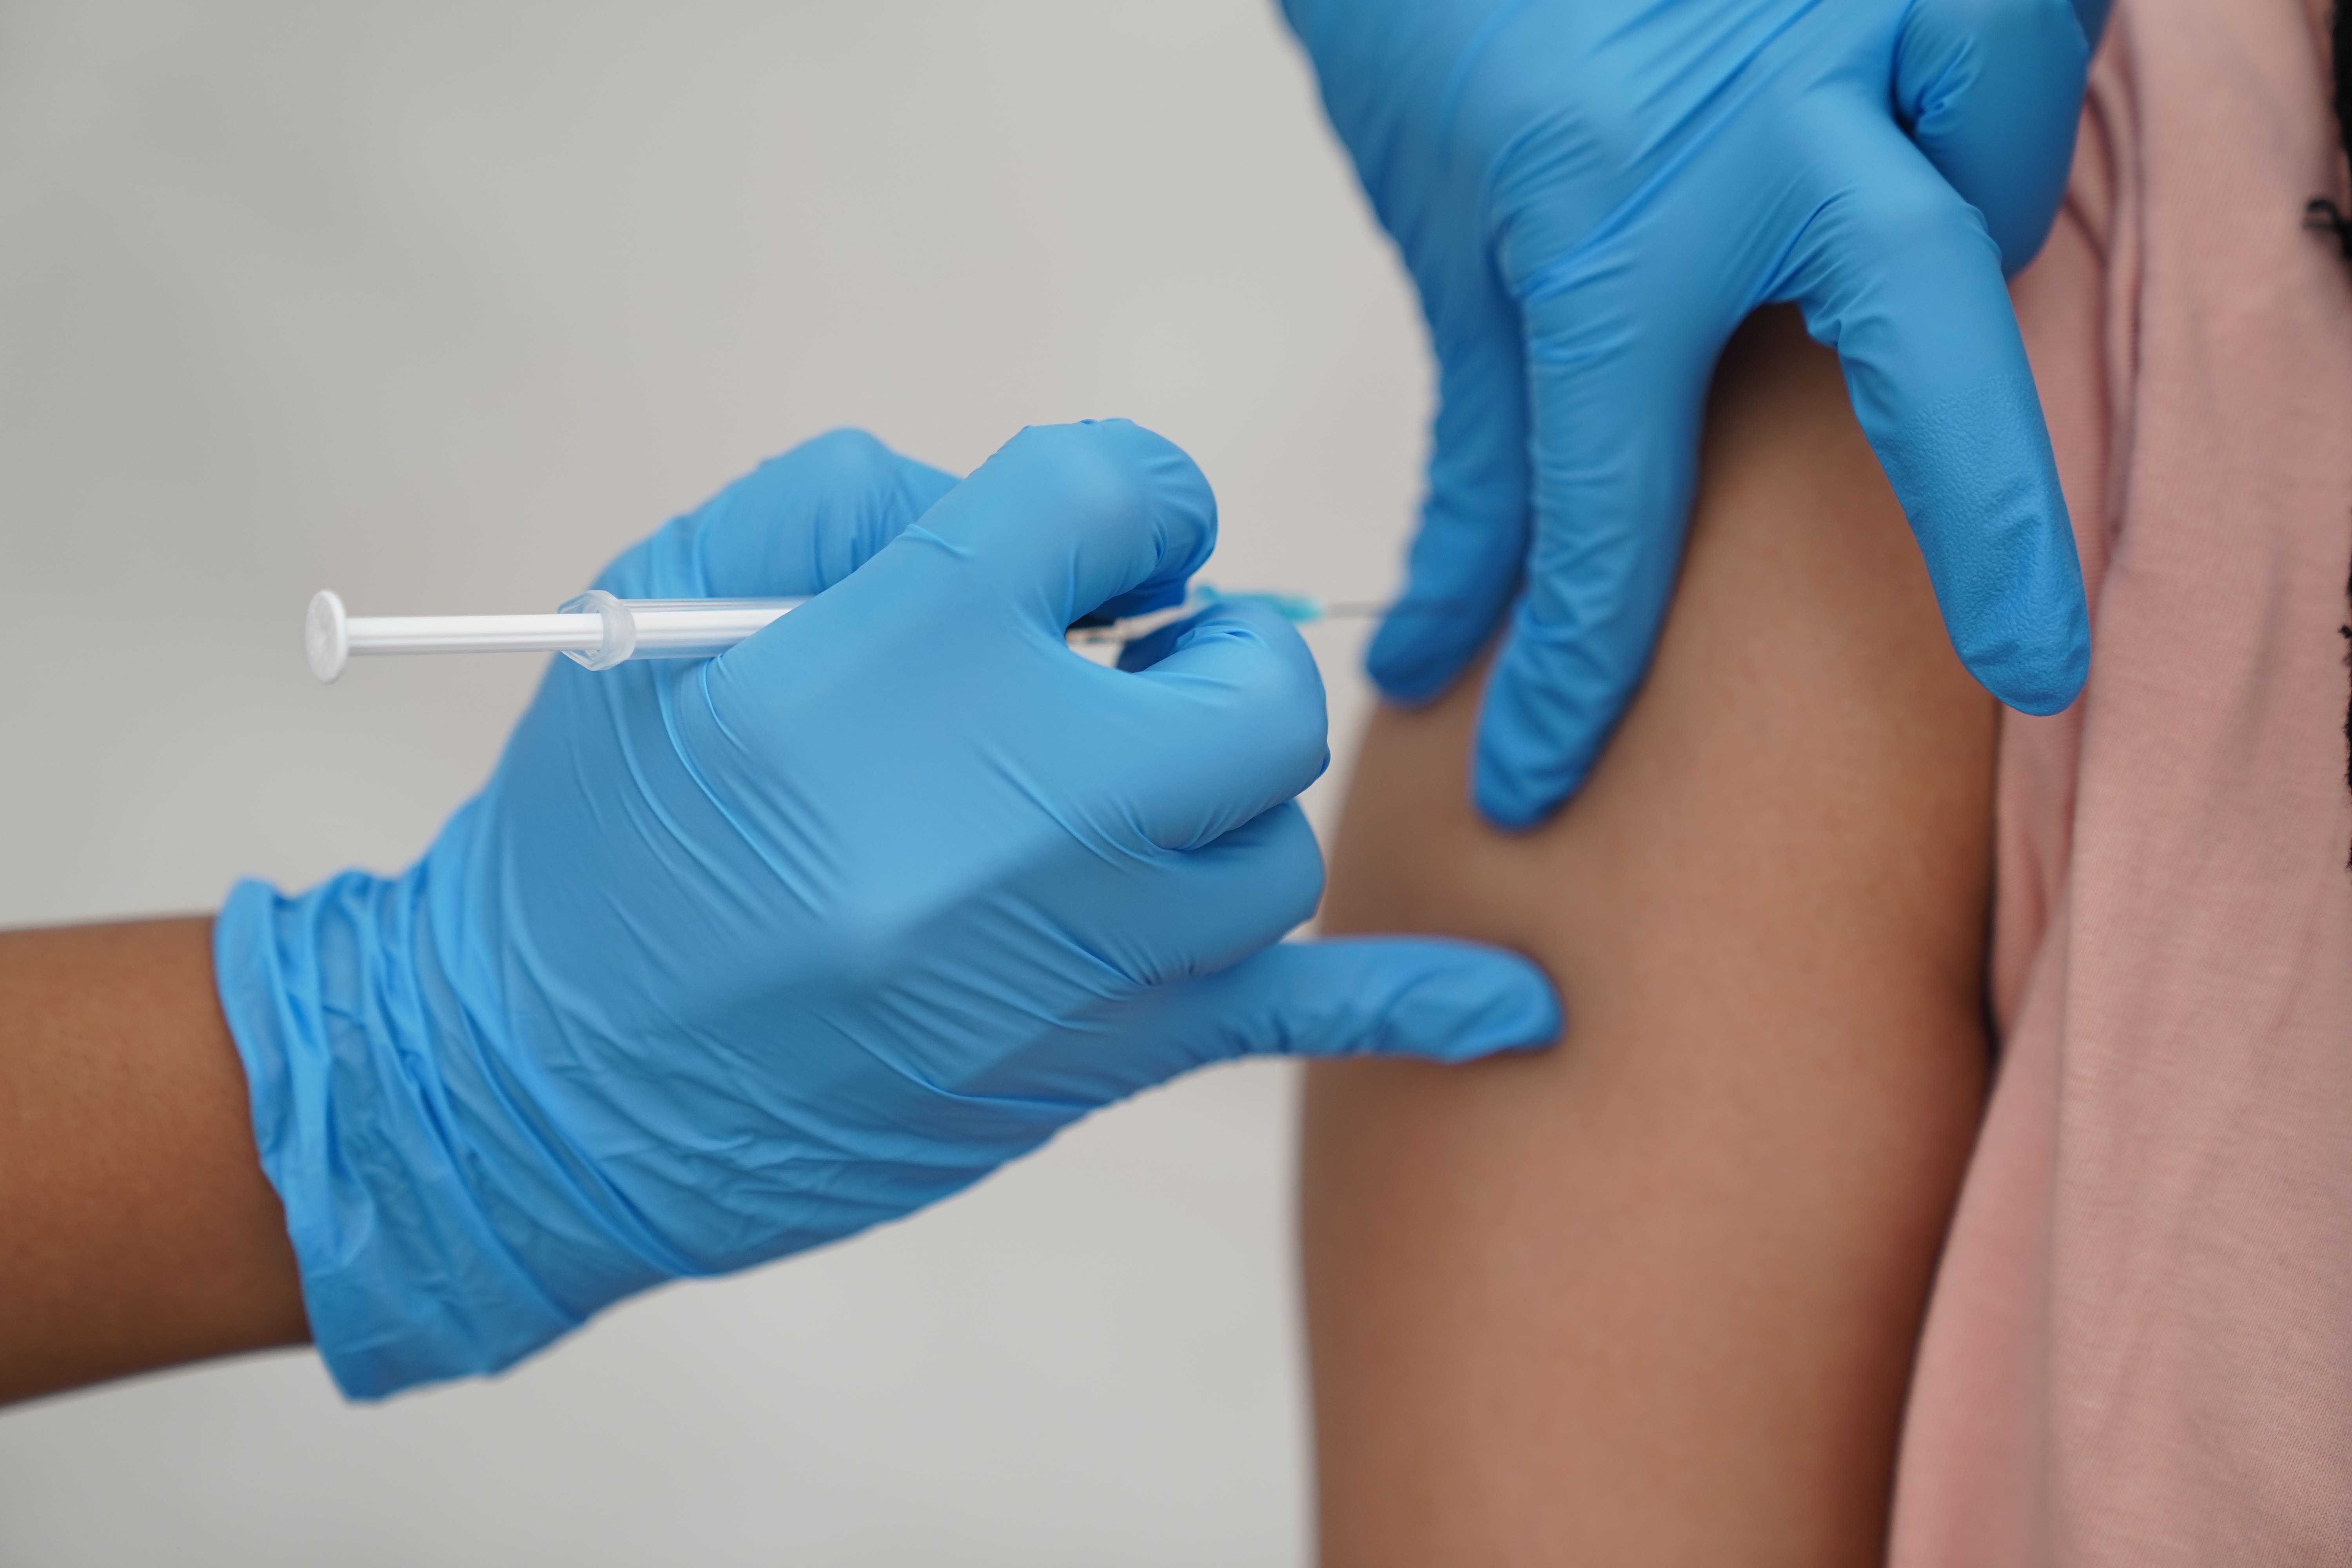 Only around 7 per cent of eligible Americans have received the latest Omicron-targeting vaccine, figures show